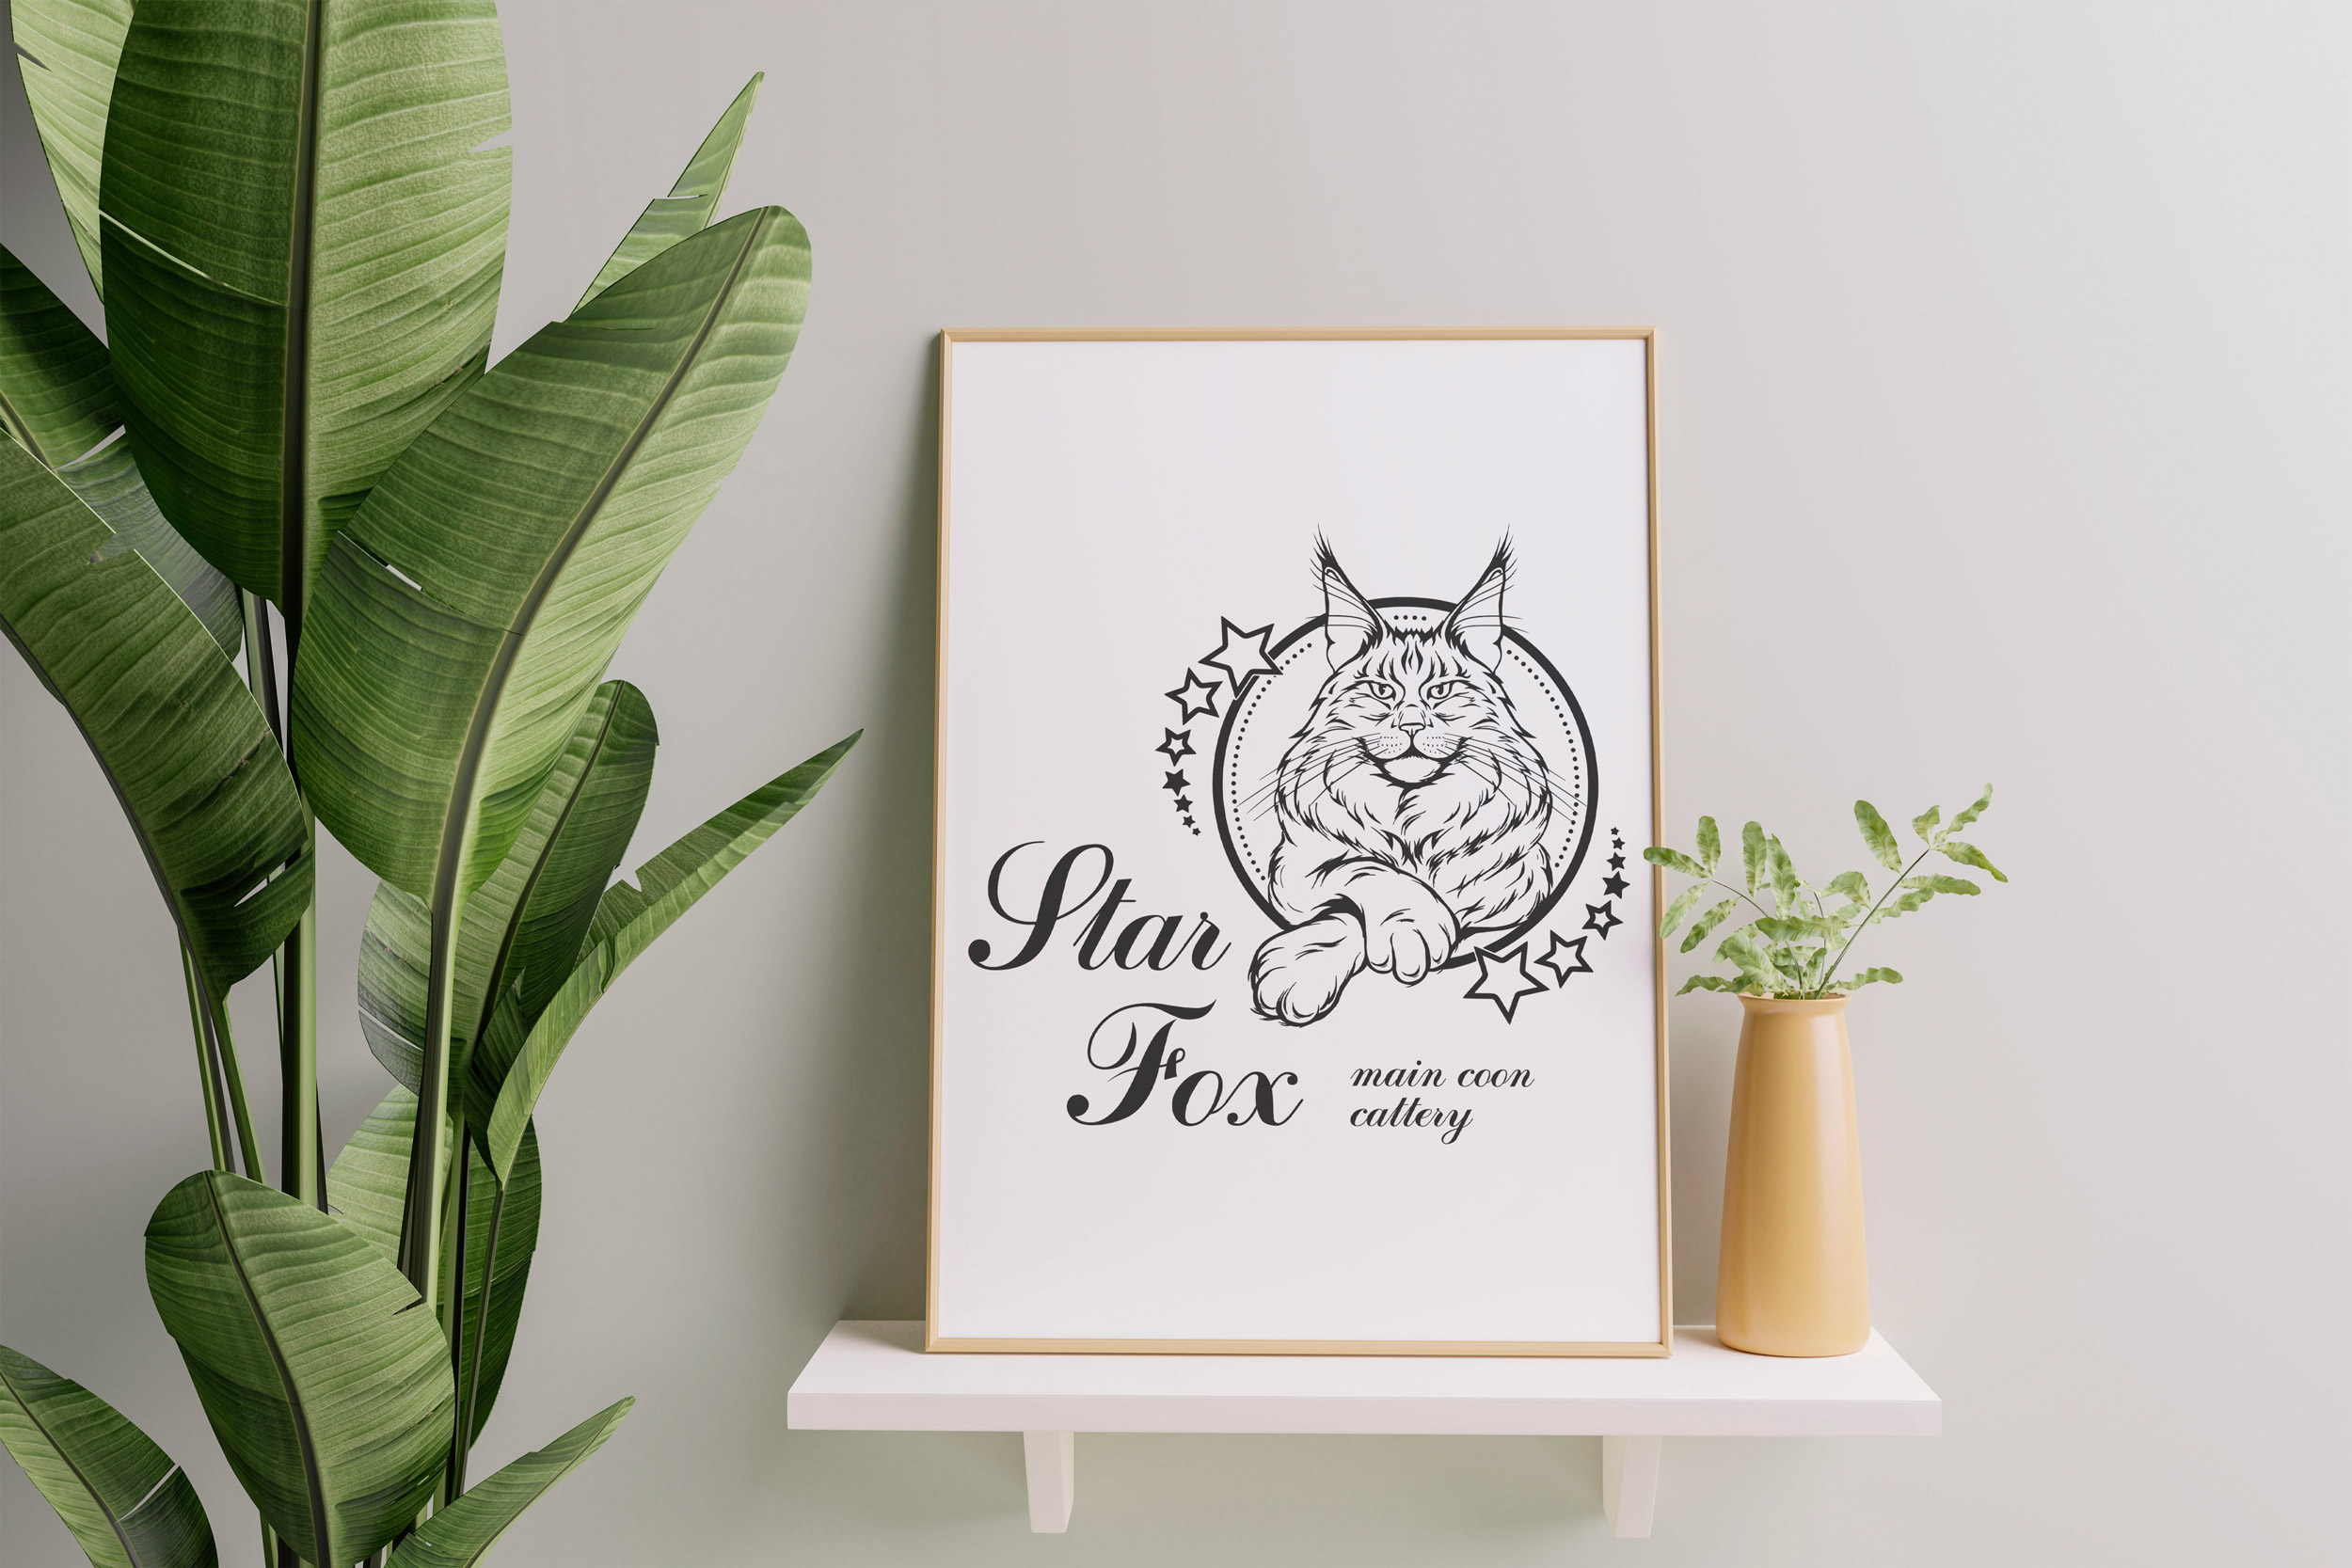 logo cattery maine coon